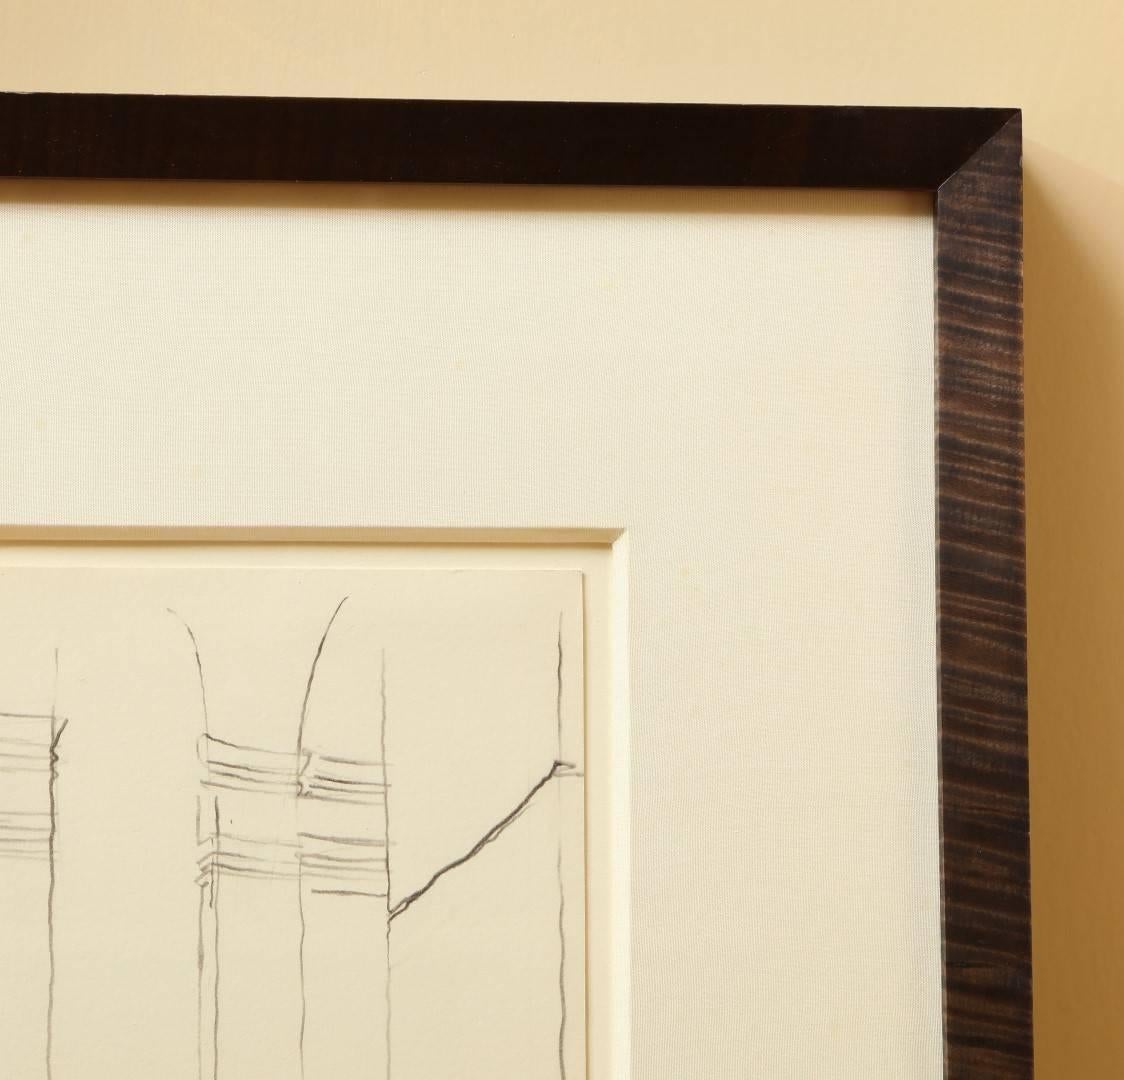 Antonio Lopez, a Pair of Framed Drawings from One Thousand and One Nights 2